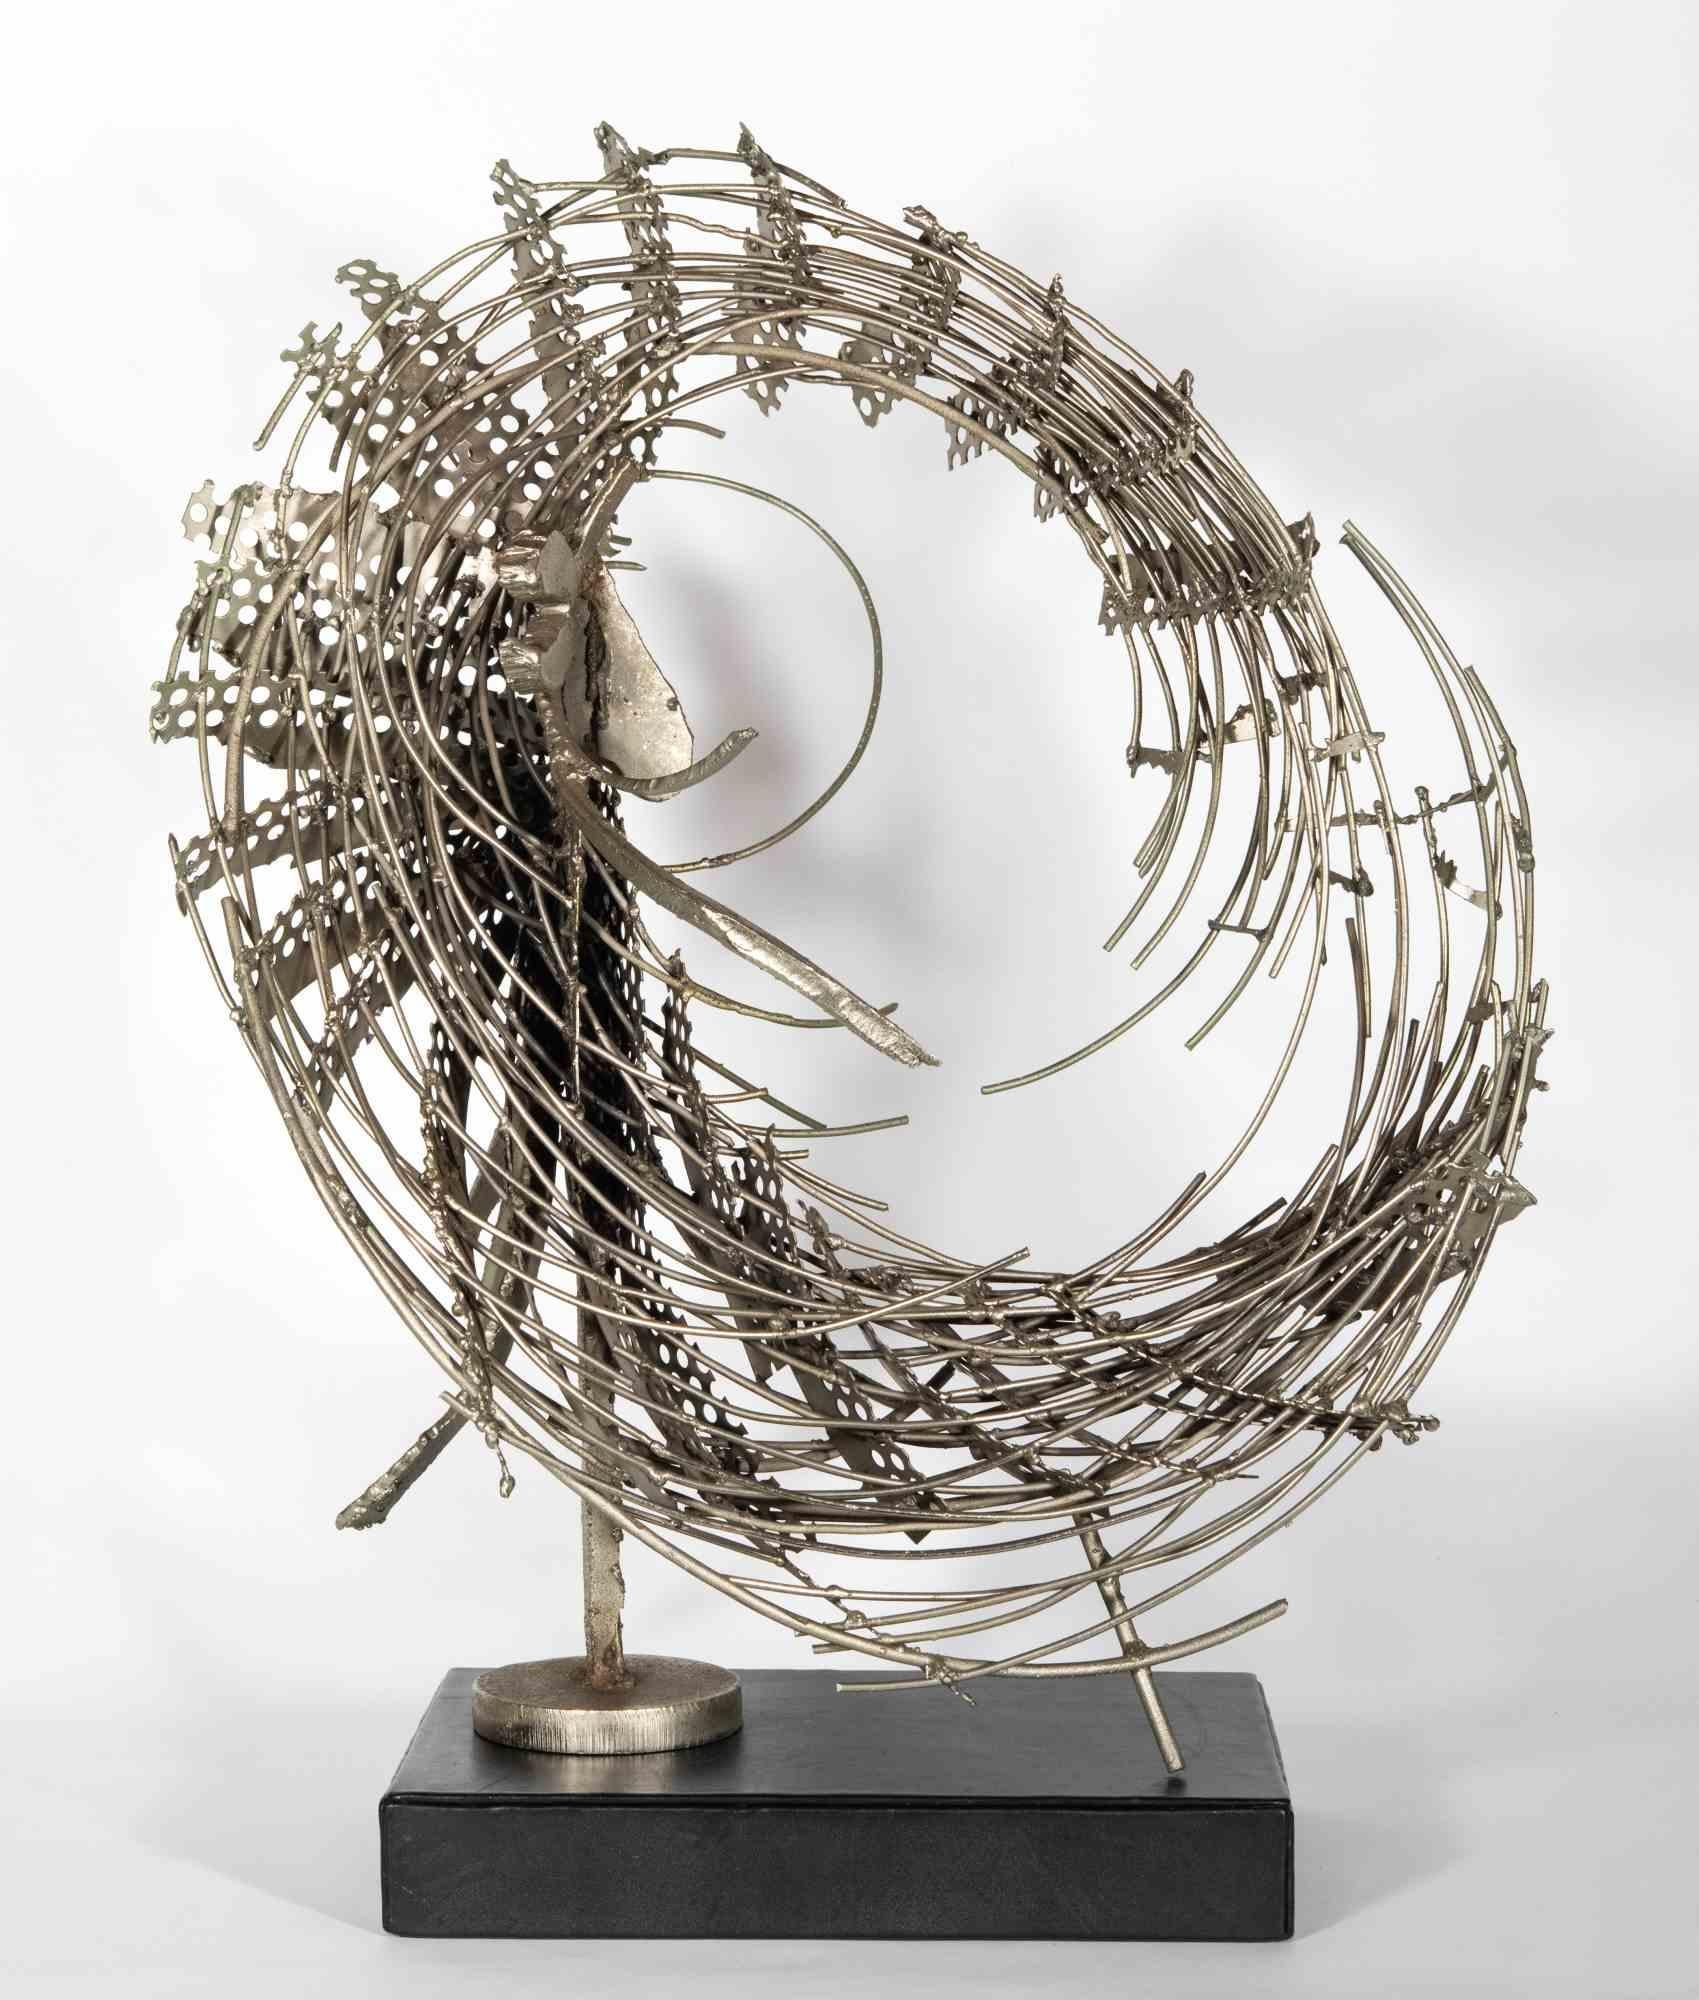 Abstract Sculpture, in Excellent condition, Authentic Creation of 1975 in iron with leather base, proposed by Sculptor Lorenzo Servalli, with which the Artist experiences Spatiality, experiencing the movement of the Living in the Infinite, comforted